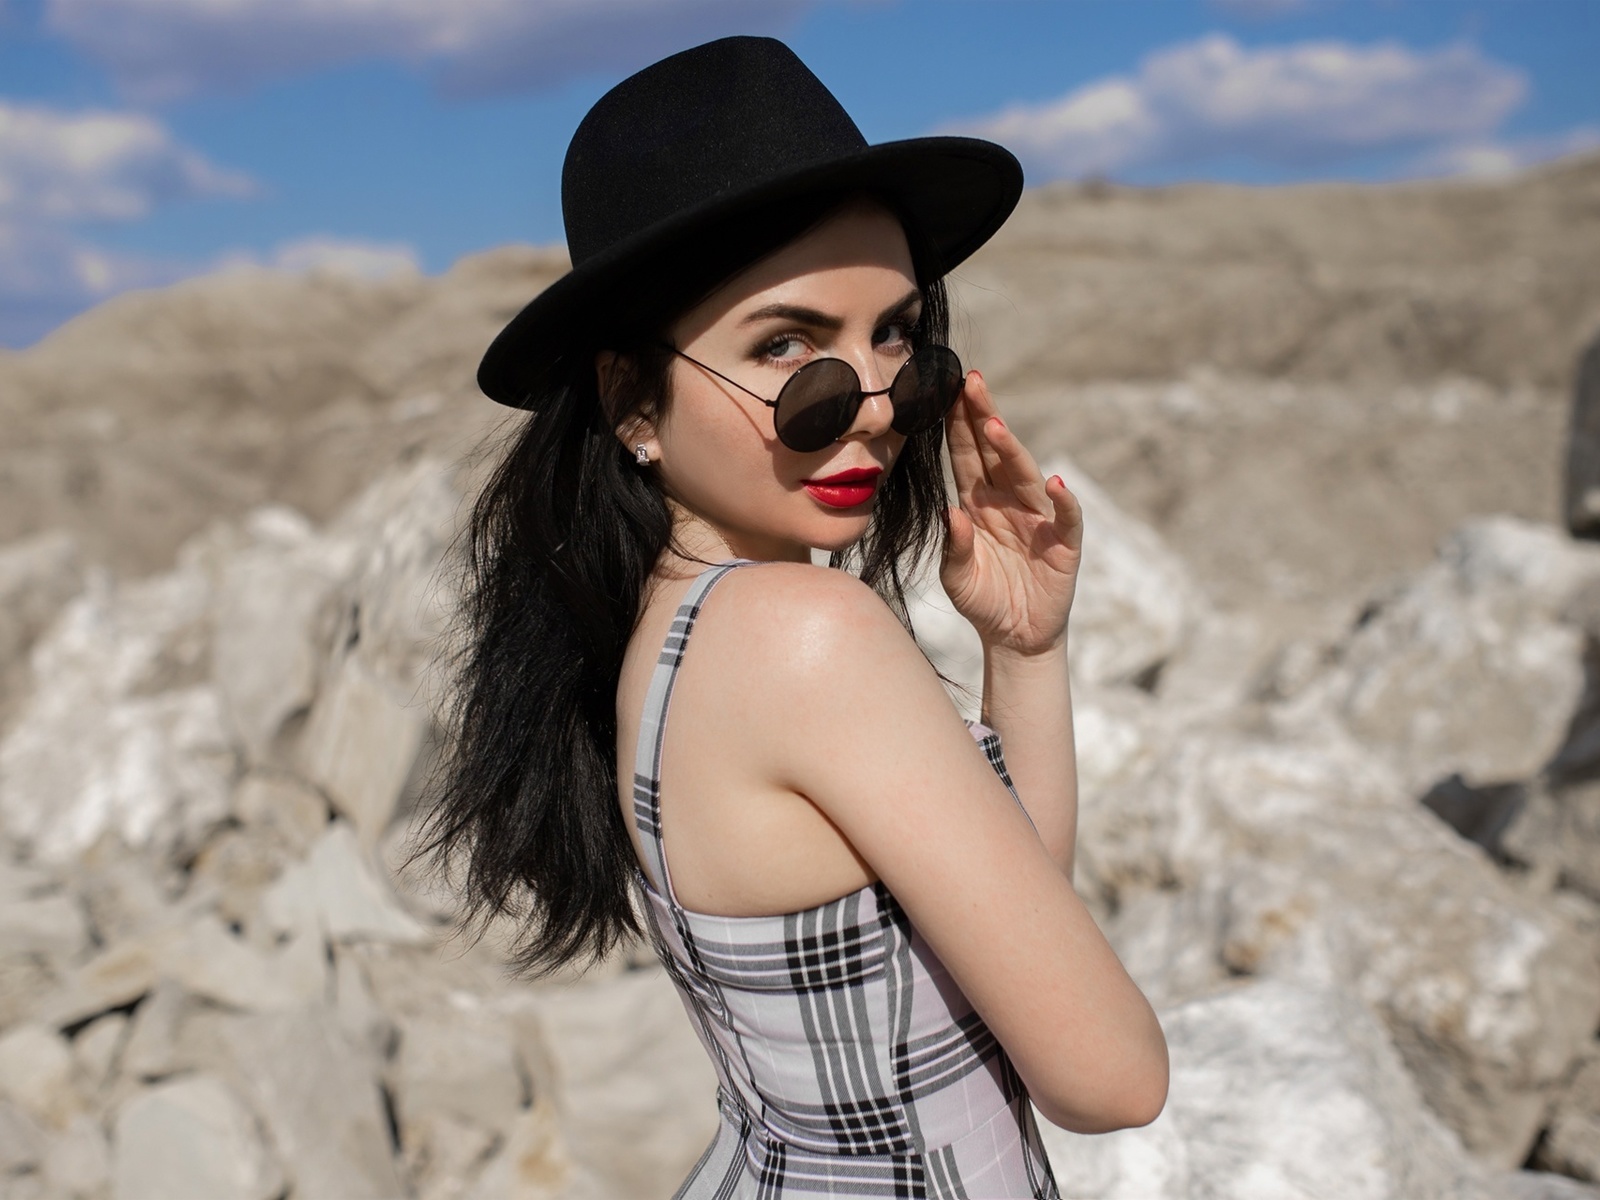 red lipstick, brunette, , women outdoors, sky, clouds, women with glasses, model, women with shades, rocks, dress, black hat